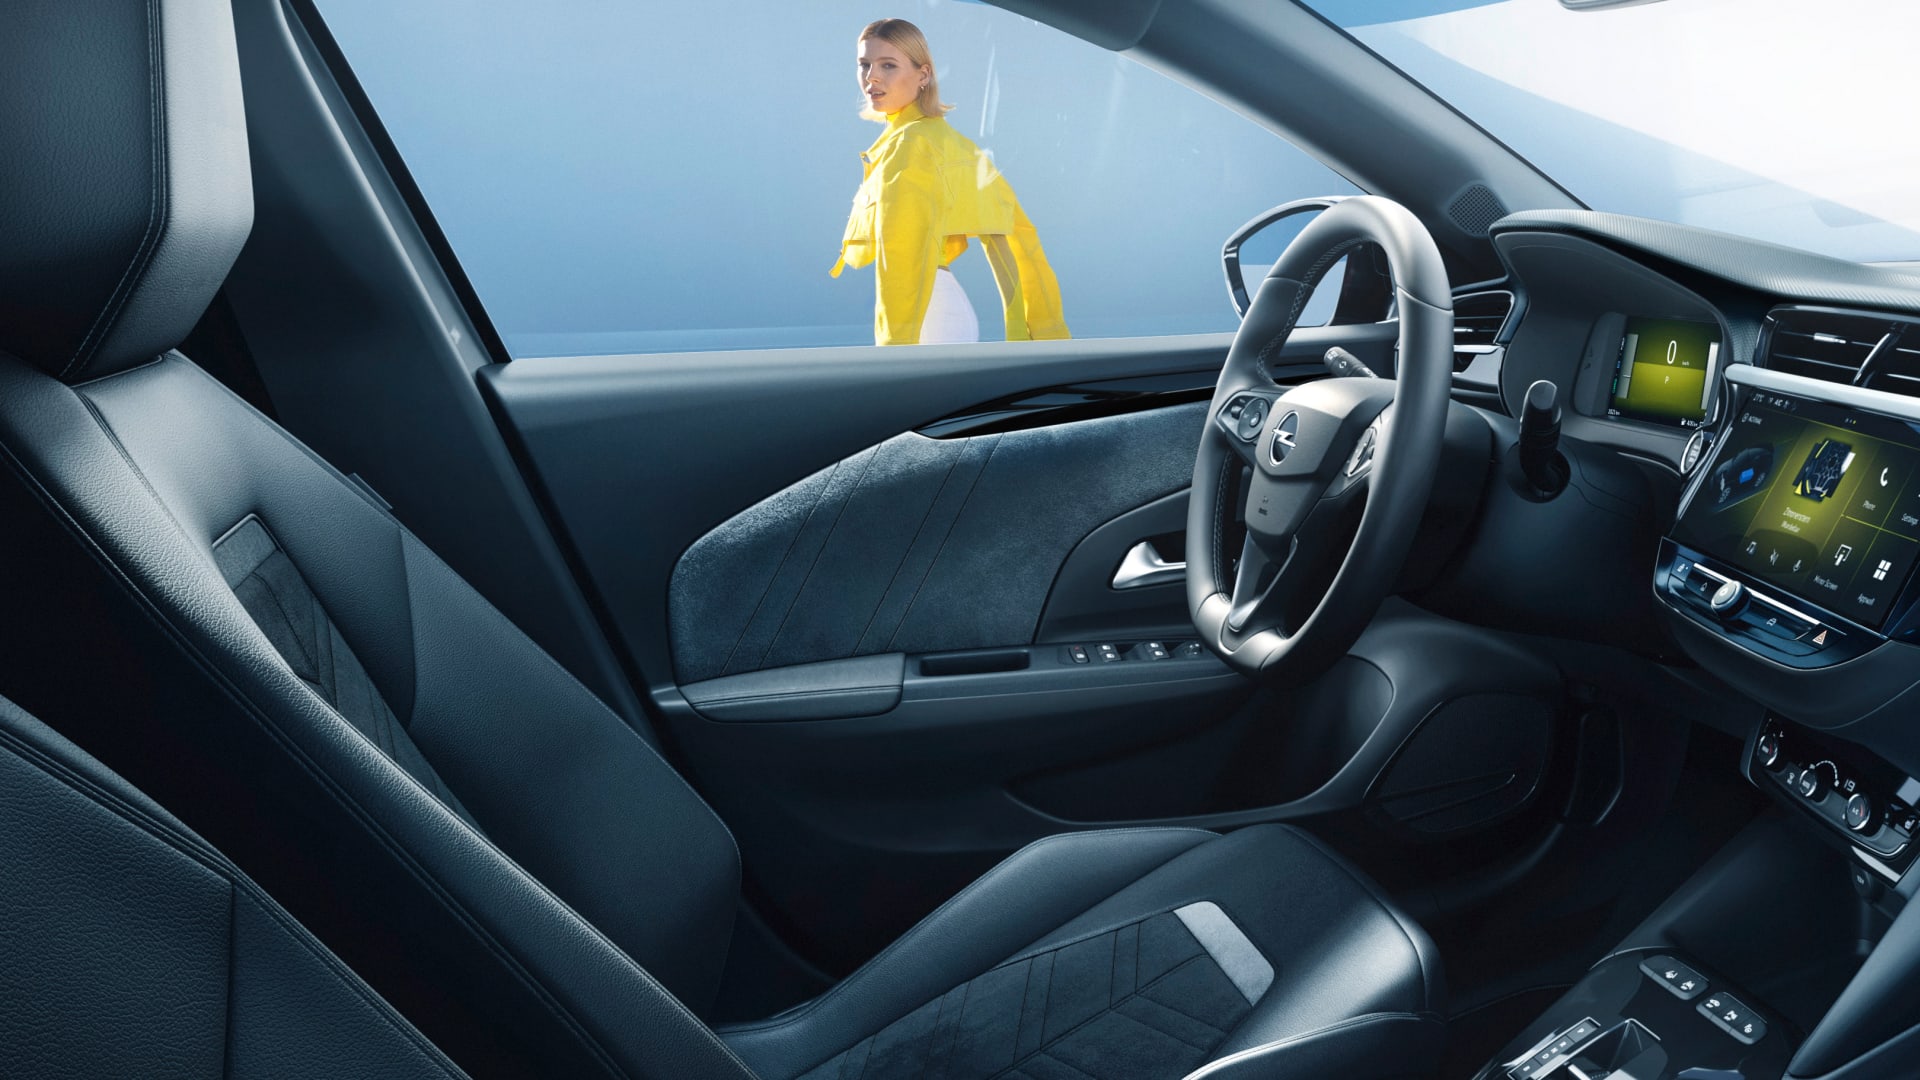 Opel Nuevo Corsa new on Fiateira Motor, official Opel dealership: offers,  promotions, and car configurator.